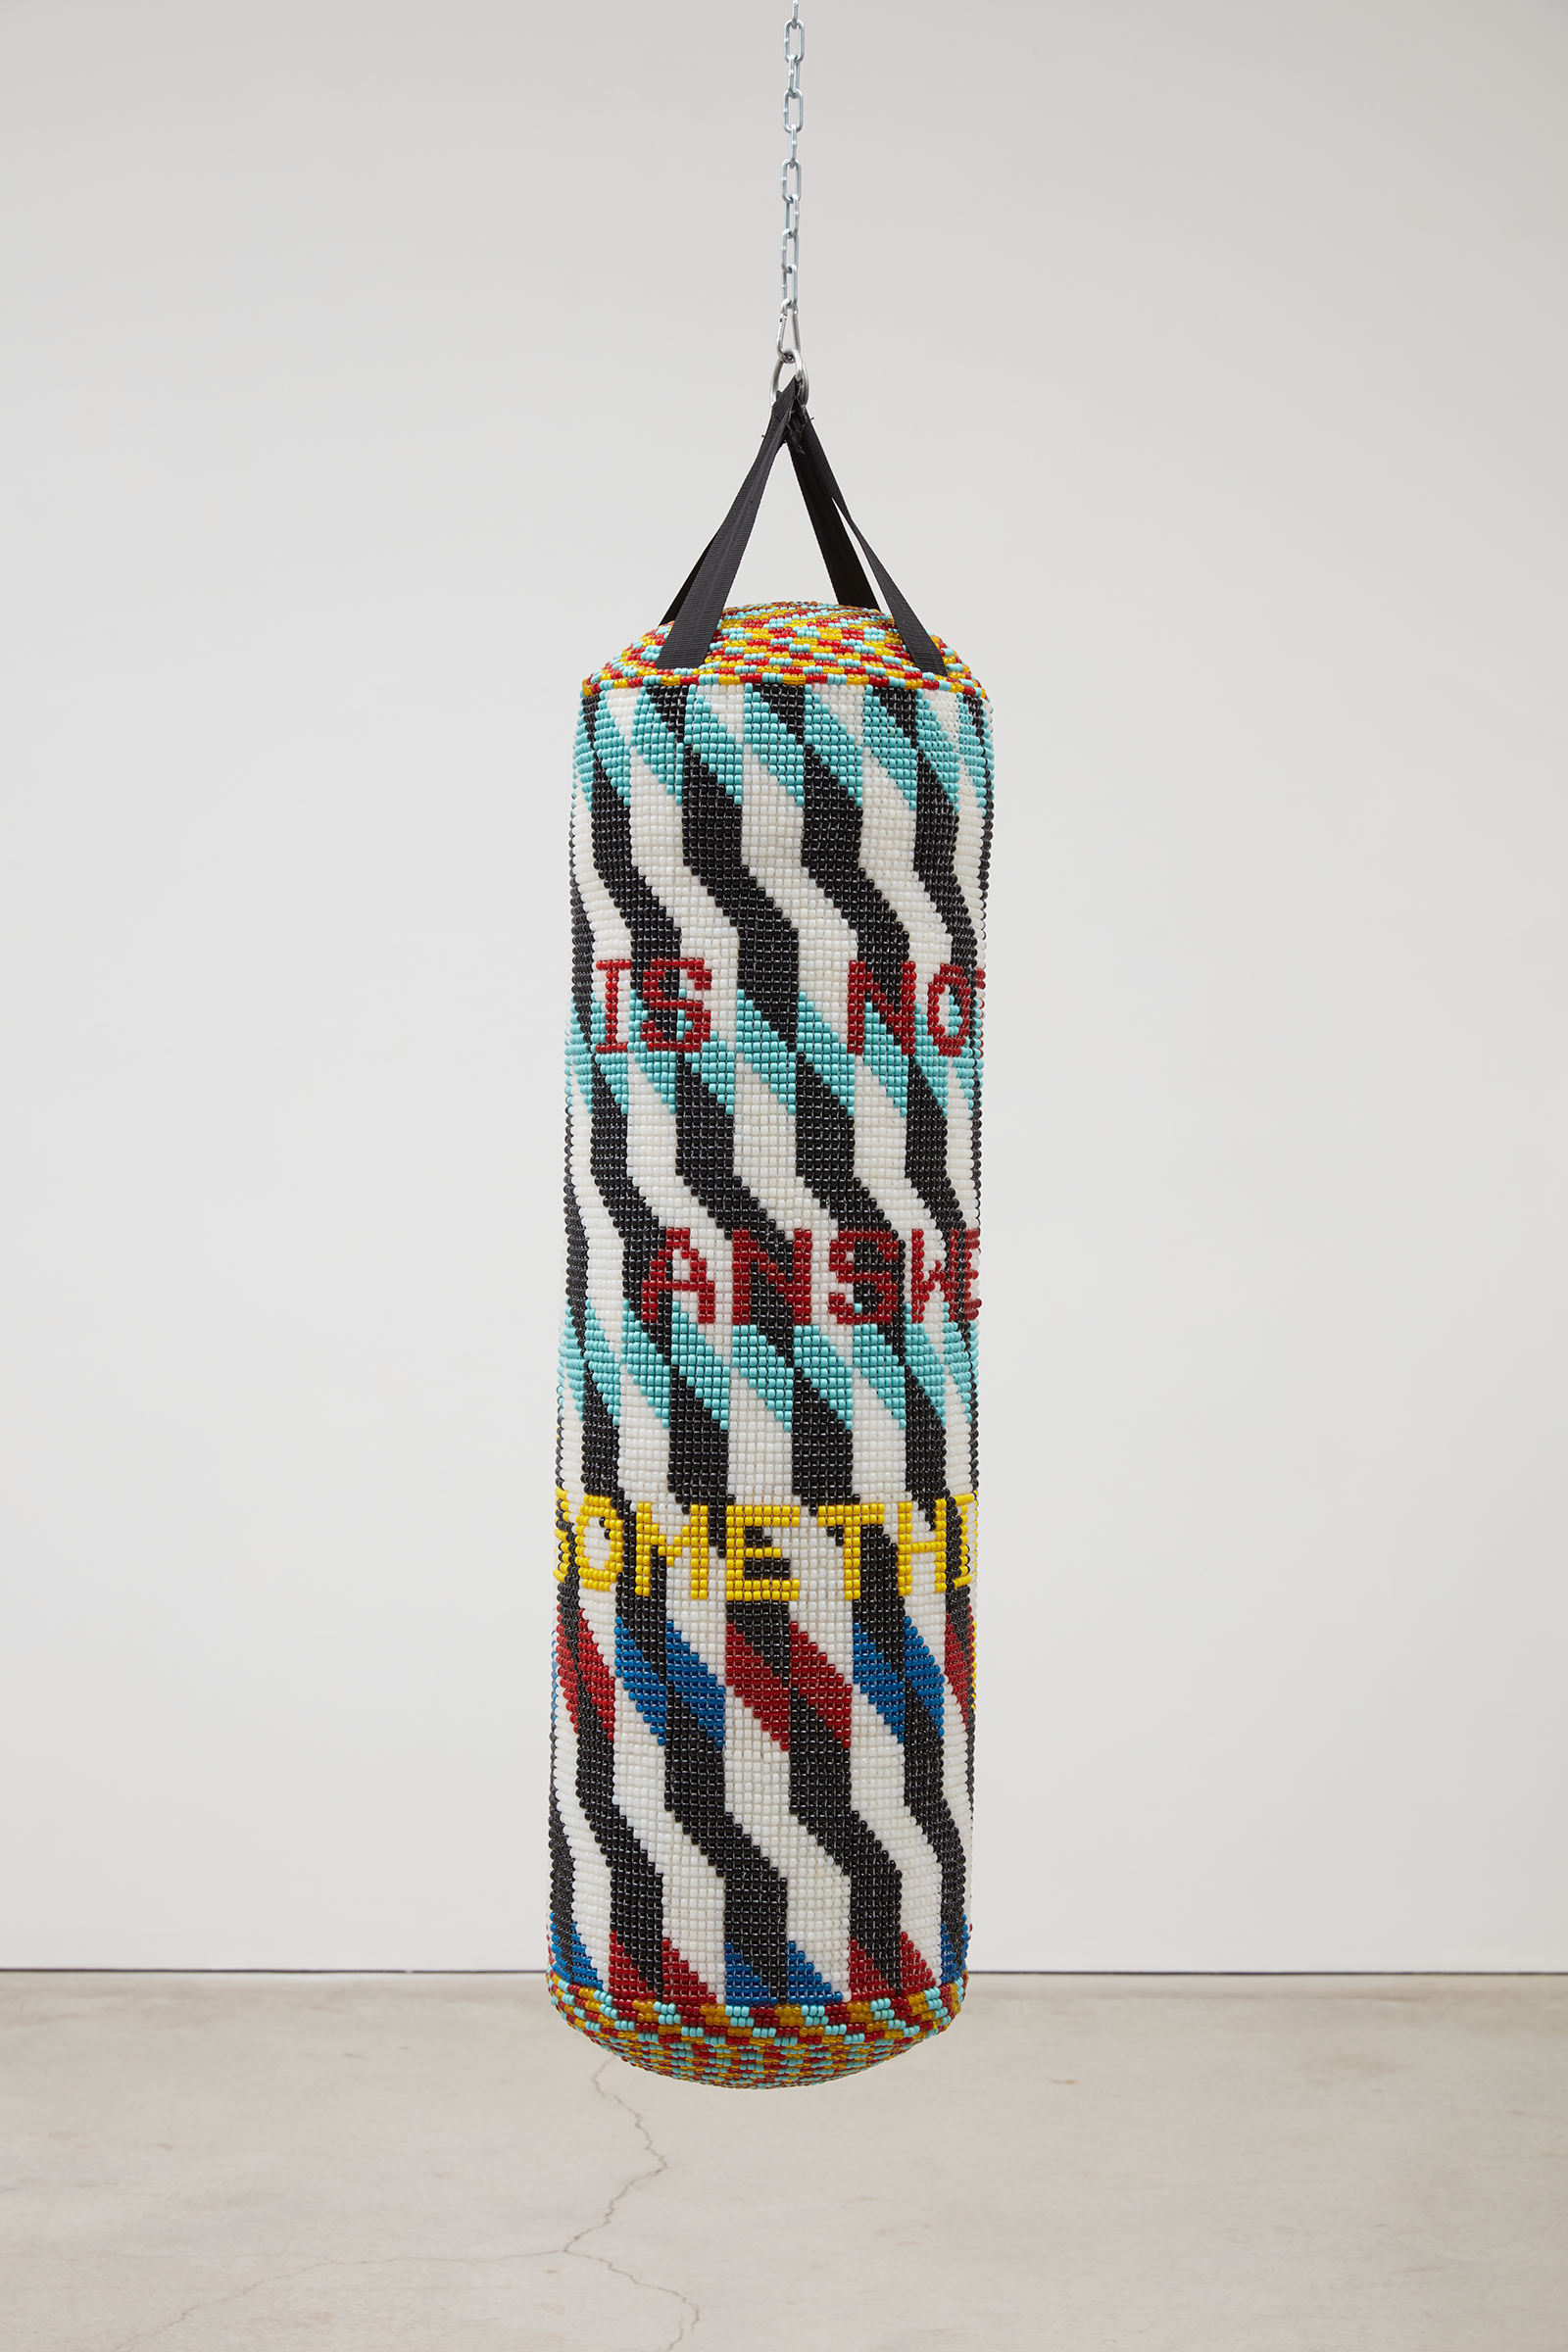 A multi-colored and beaded punching bag hangs from the ceiling against a white wall